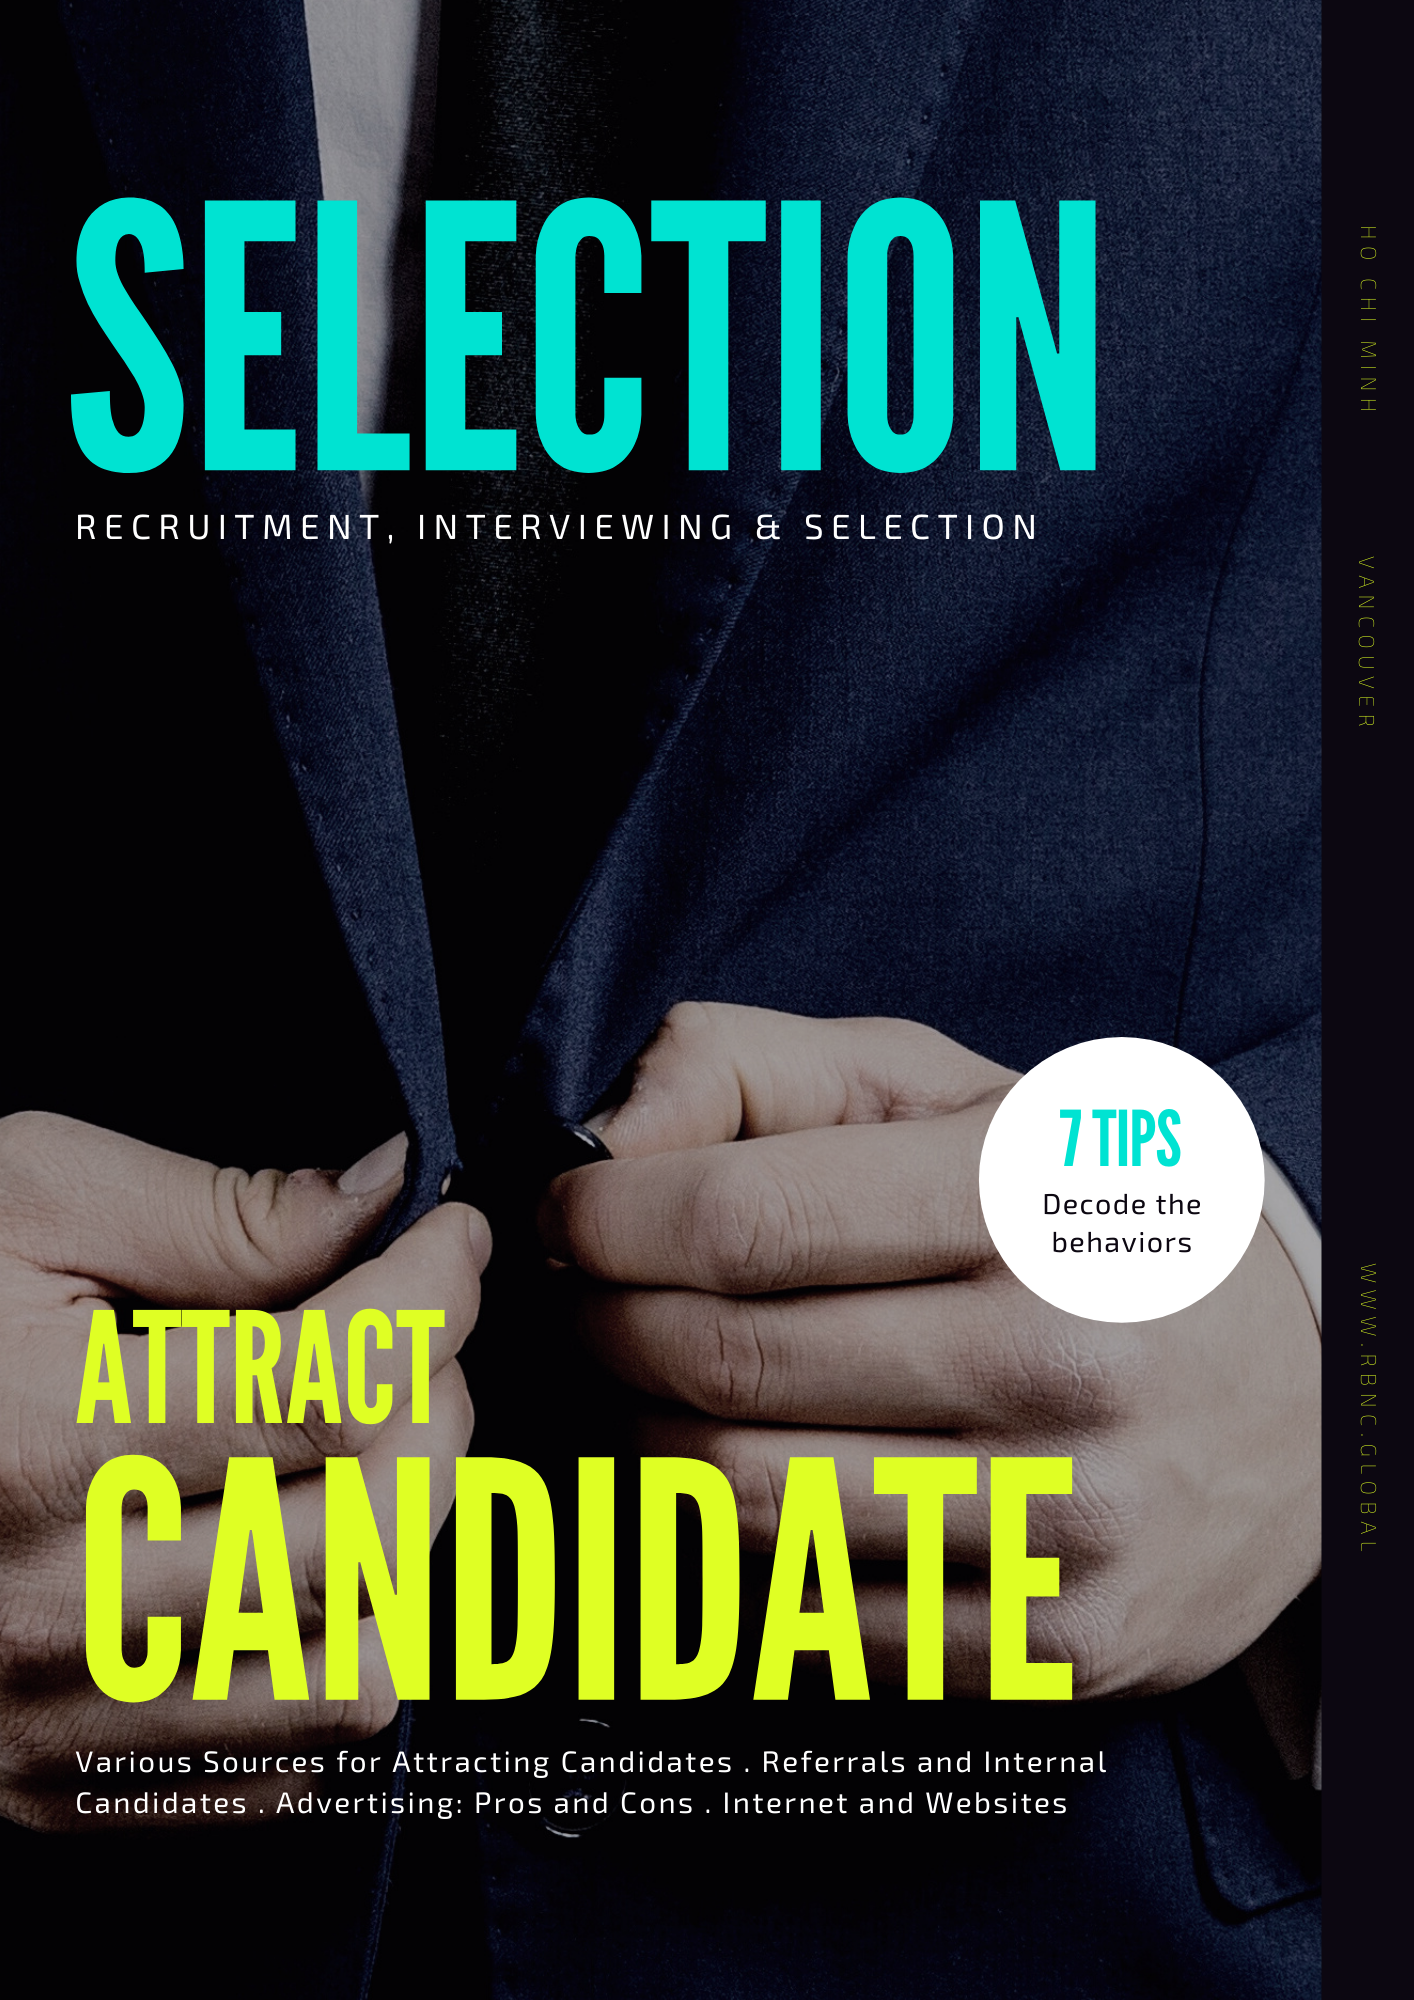 Recruitment, Interviewing & Selection